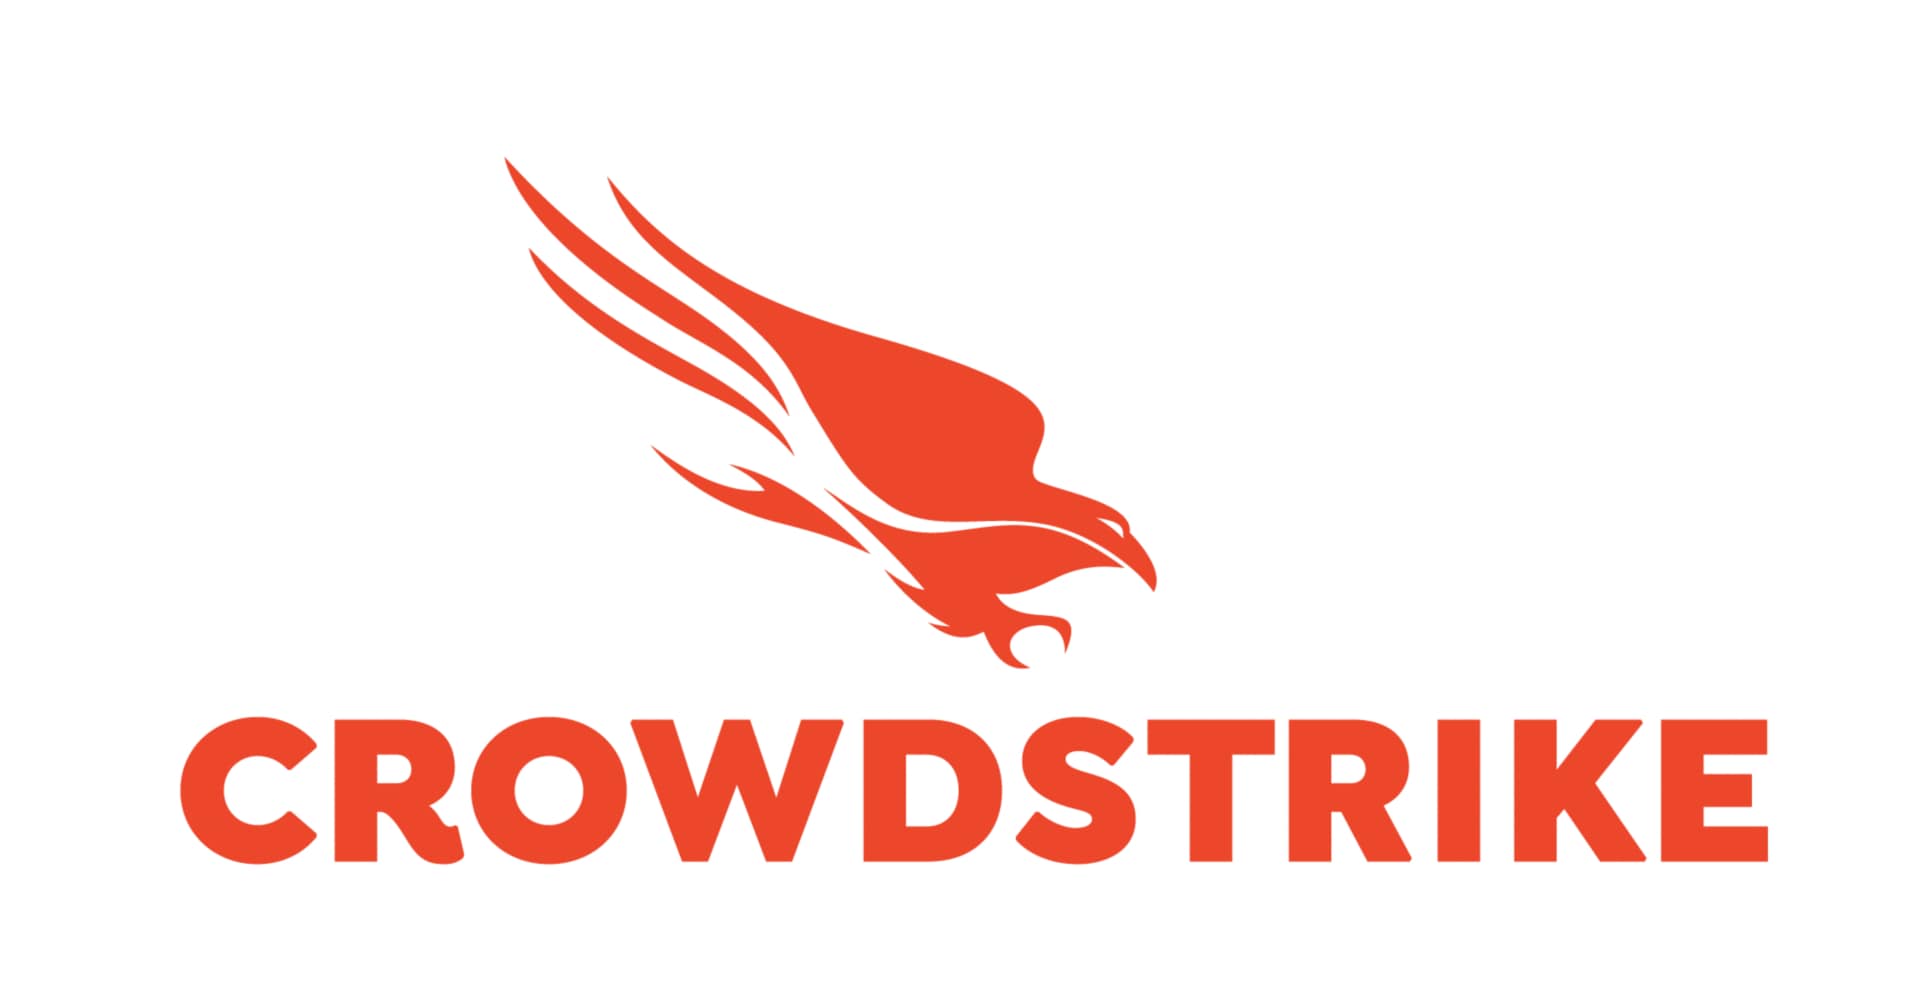 CrowdStrike Intelligence Actor Profiles/Indicators of Compromise (IOC) Feed